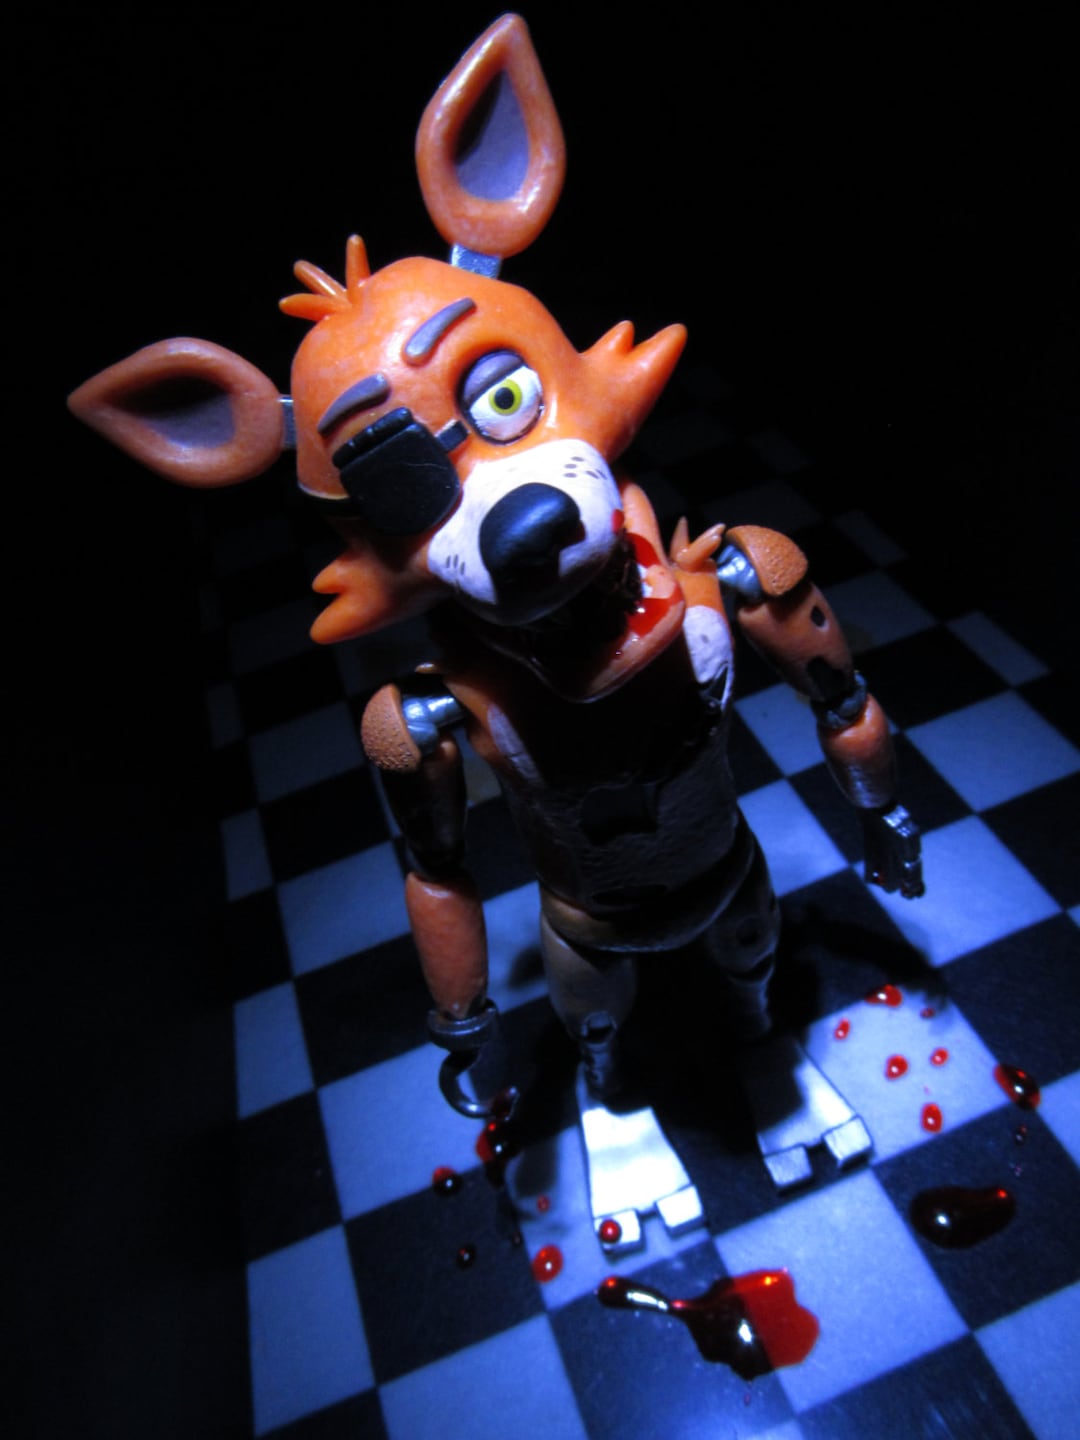 I've made my second Withered action figure Withered Foxy